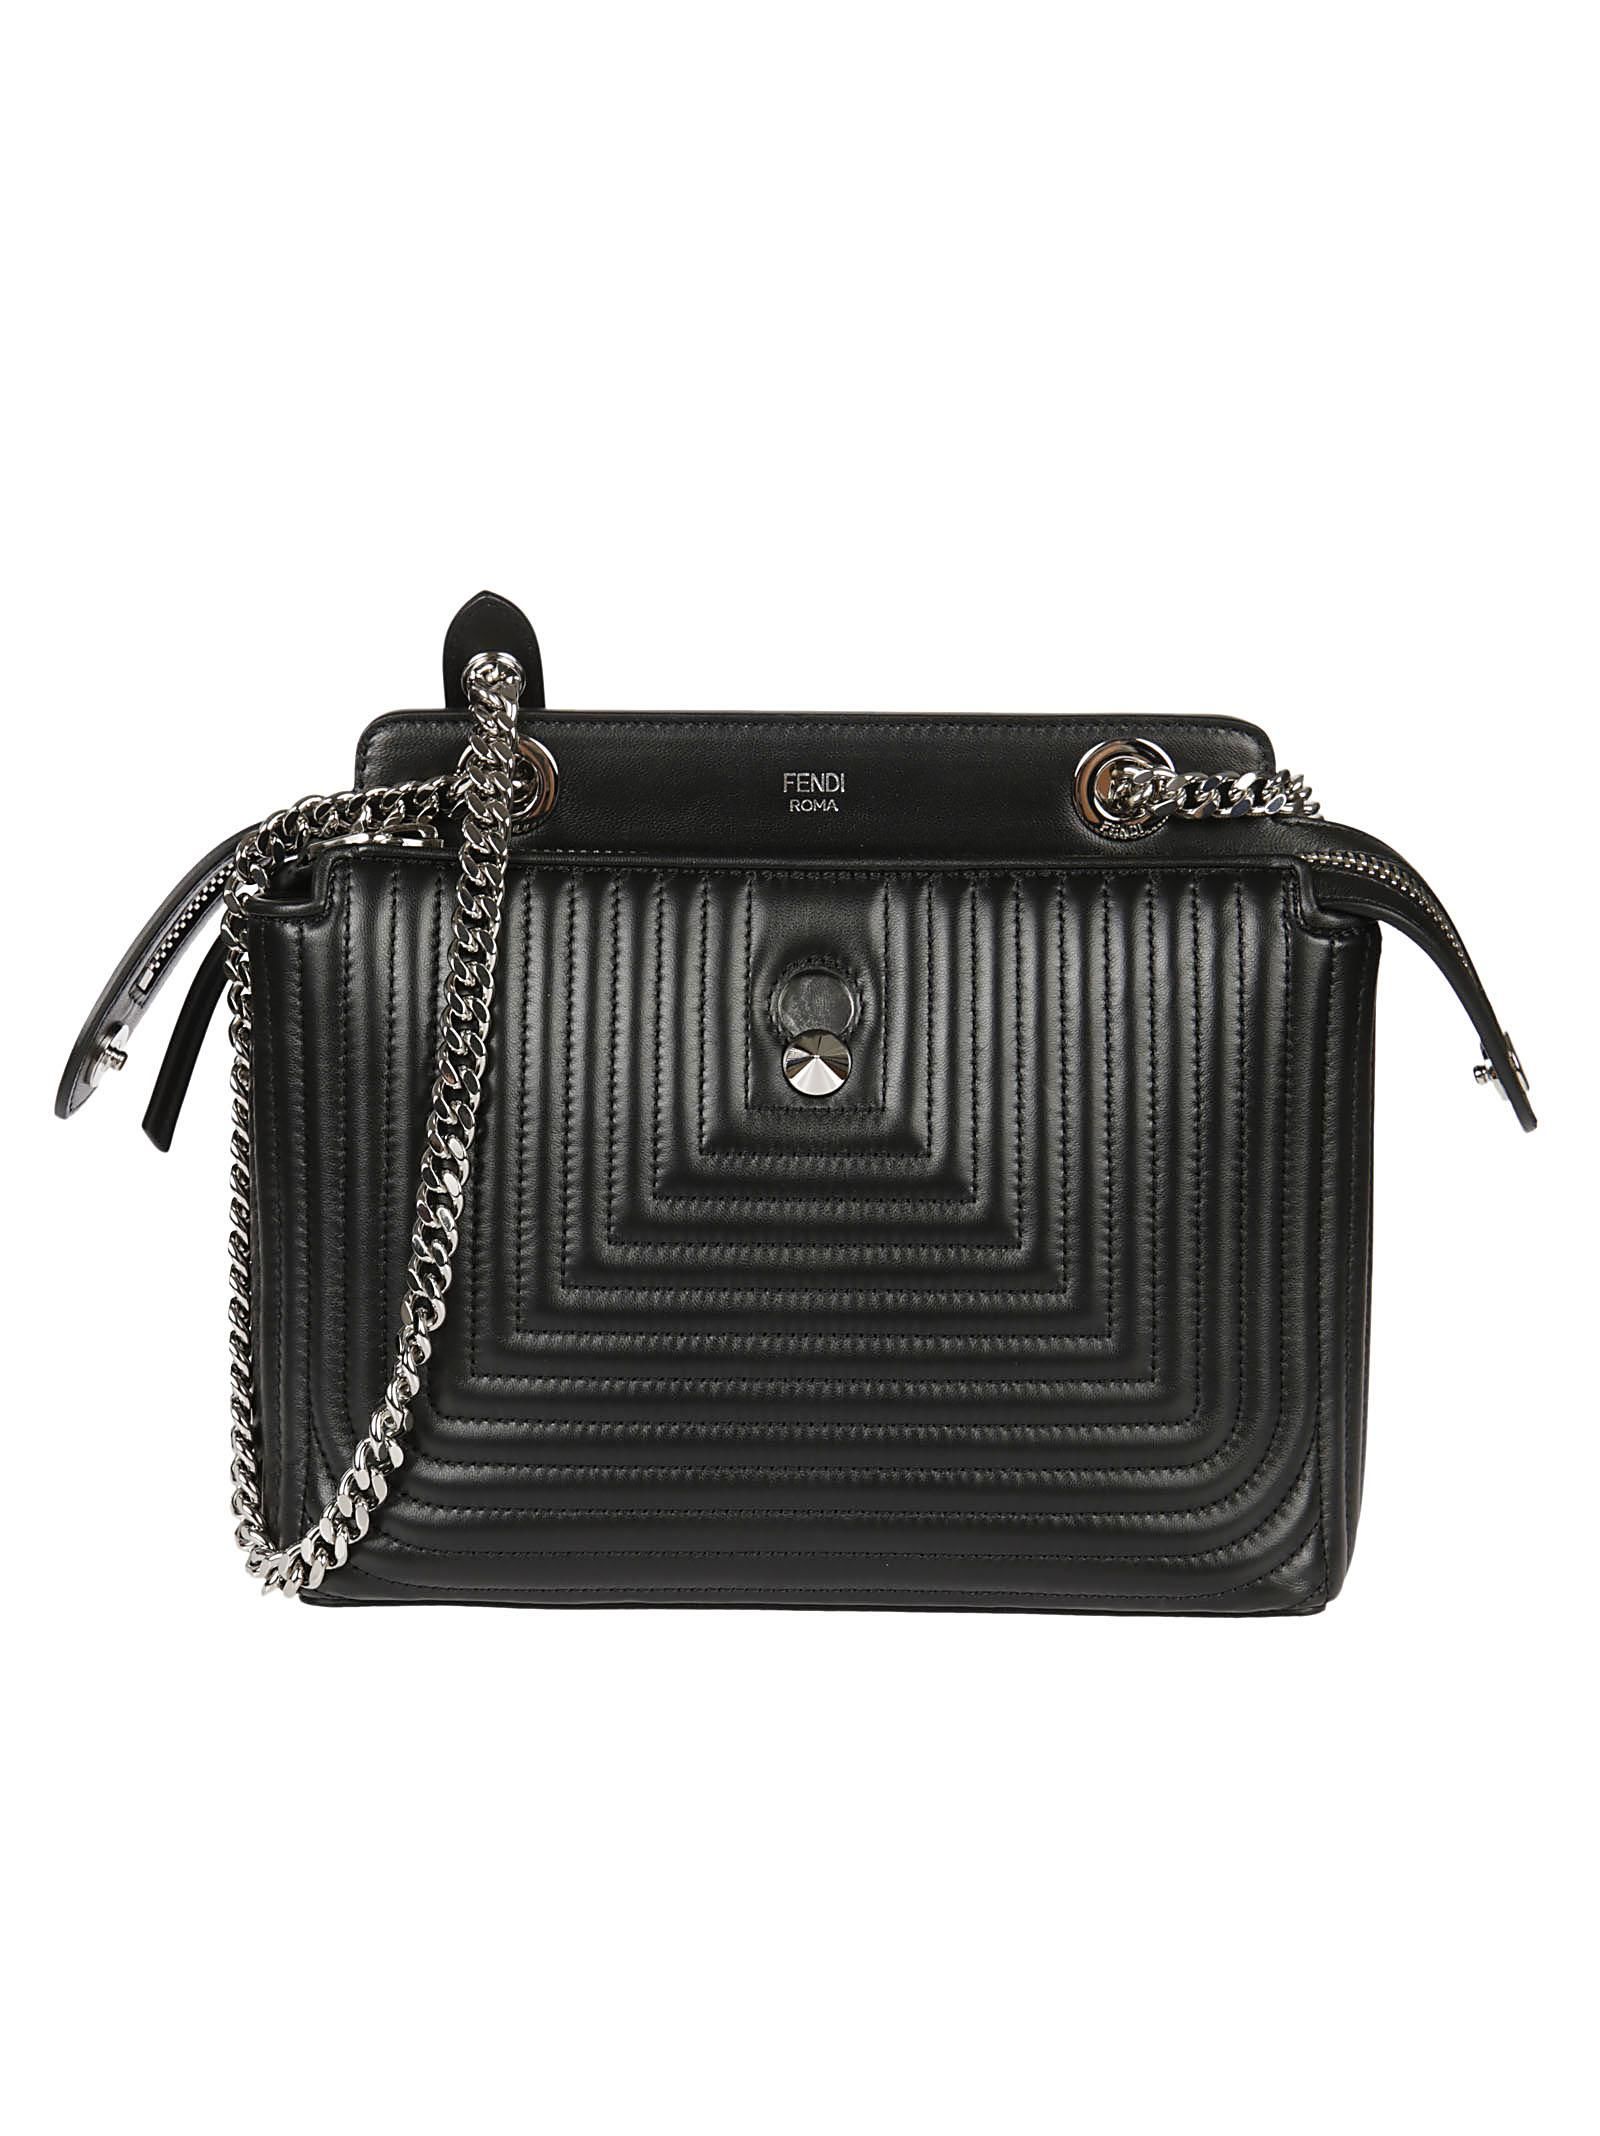 FENDI Dotcom Click Small Quilted Leather Shoulder Bag in Black | ModeSens